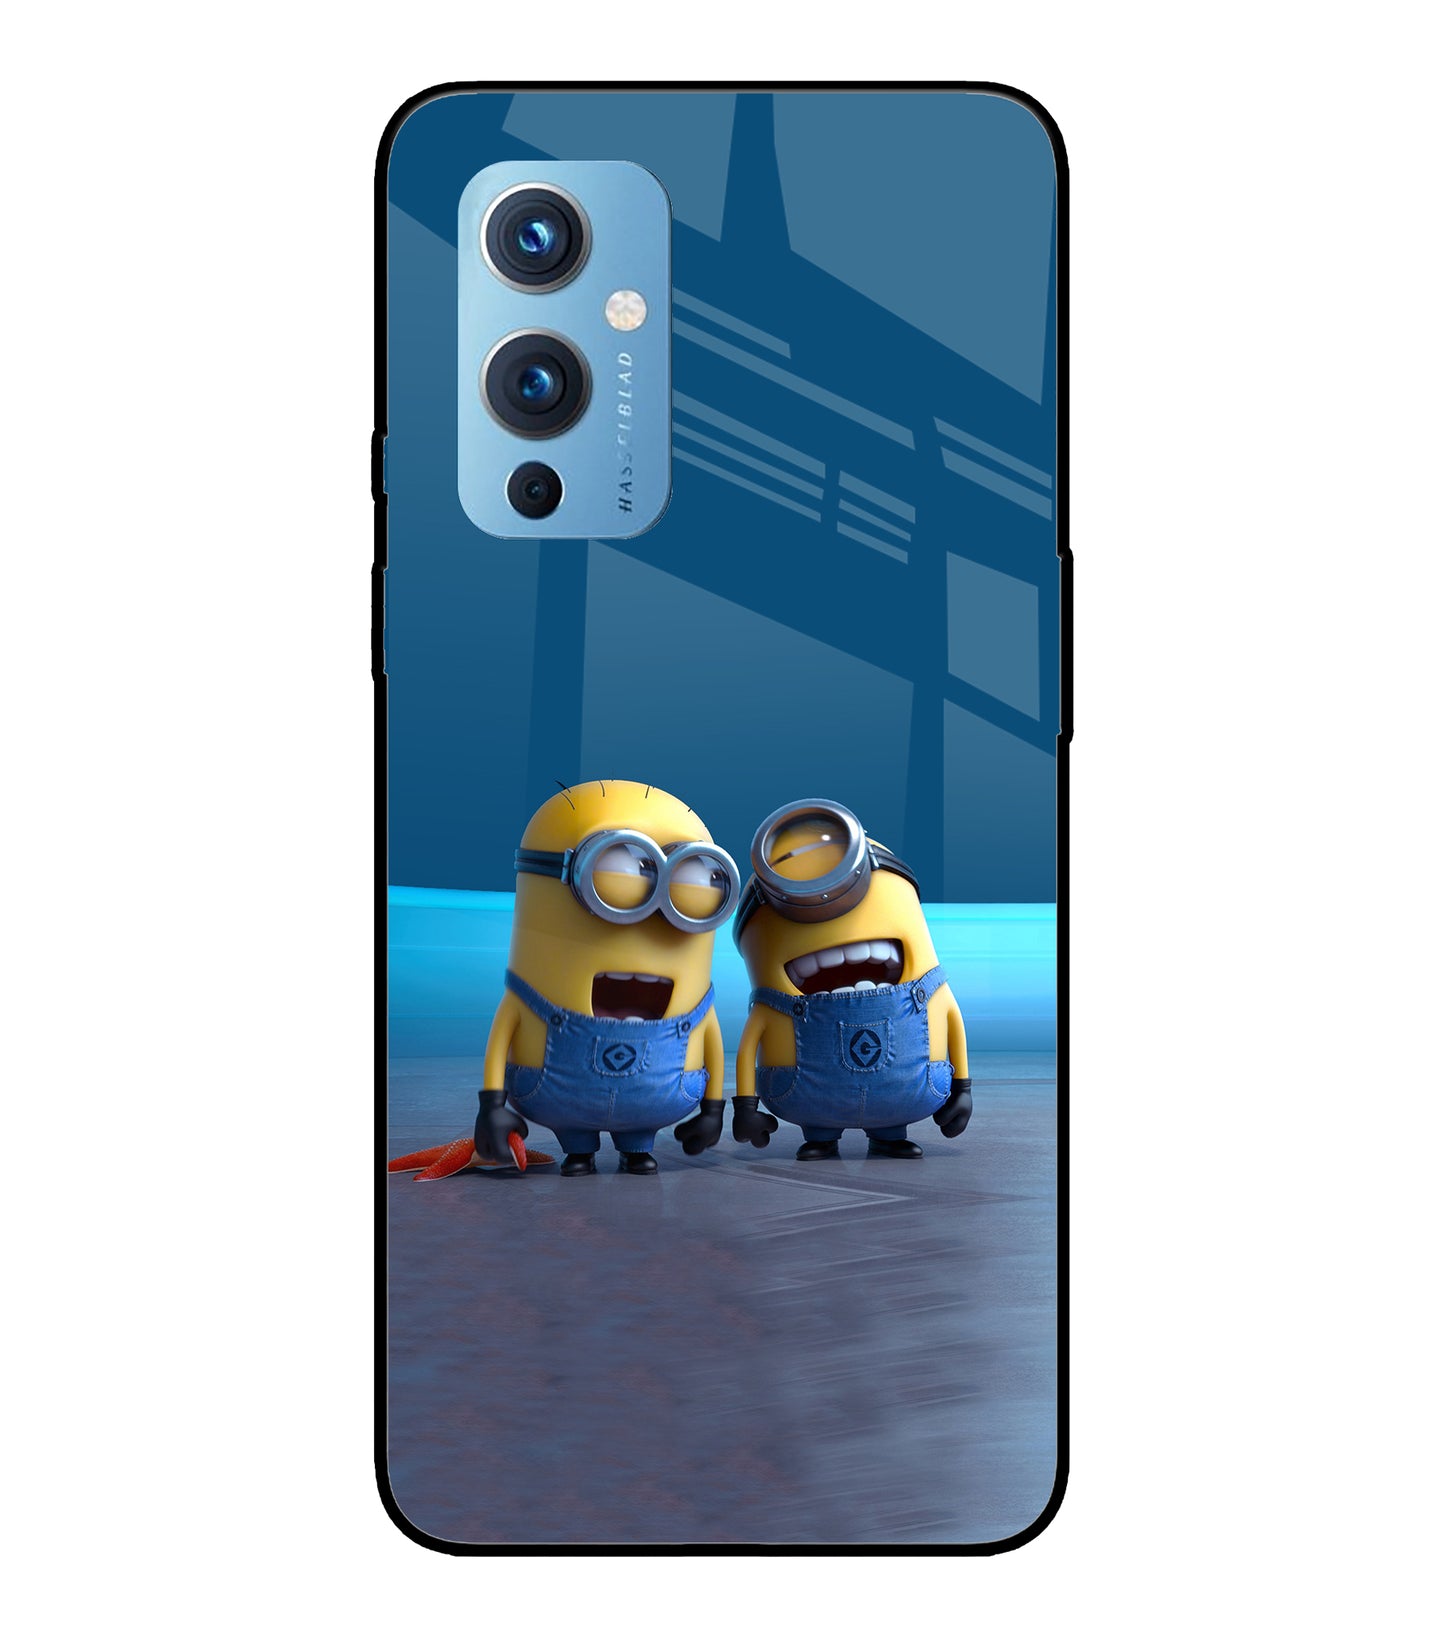 Minion Laughing Oneplus 9 Glass Cover